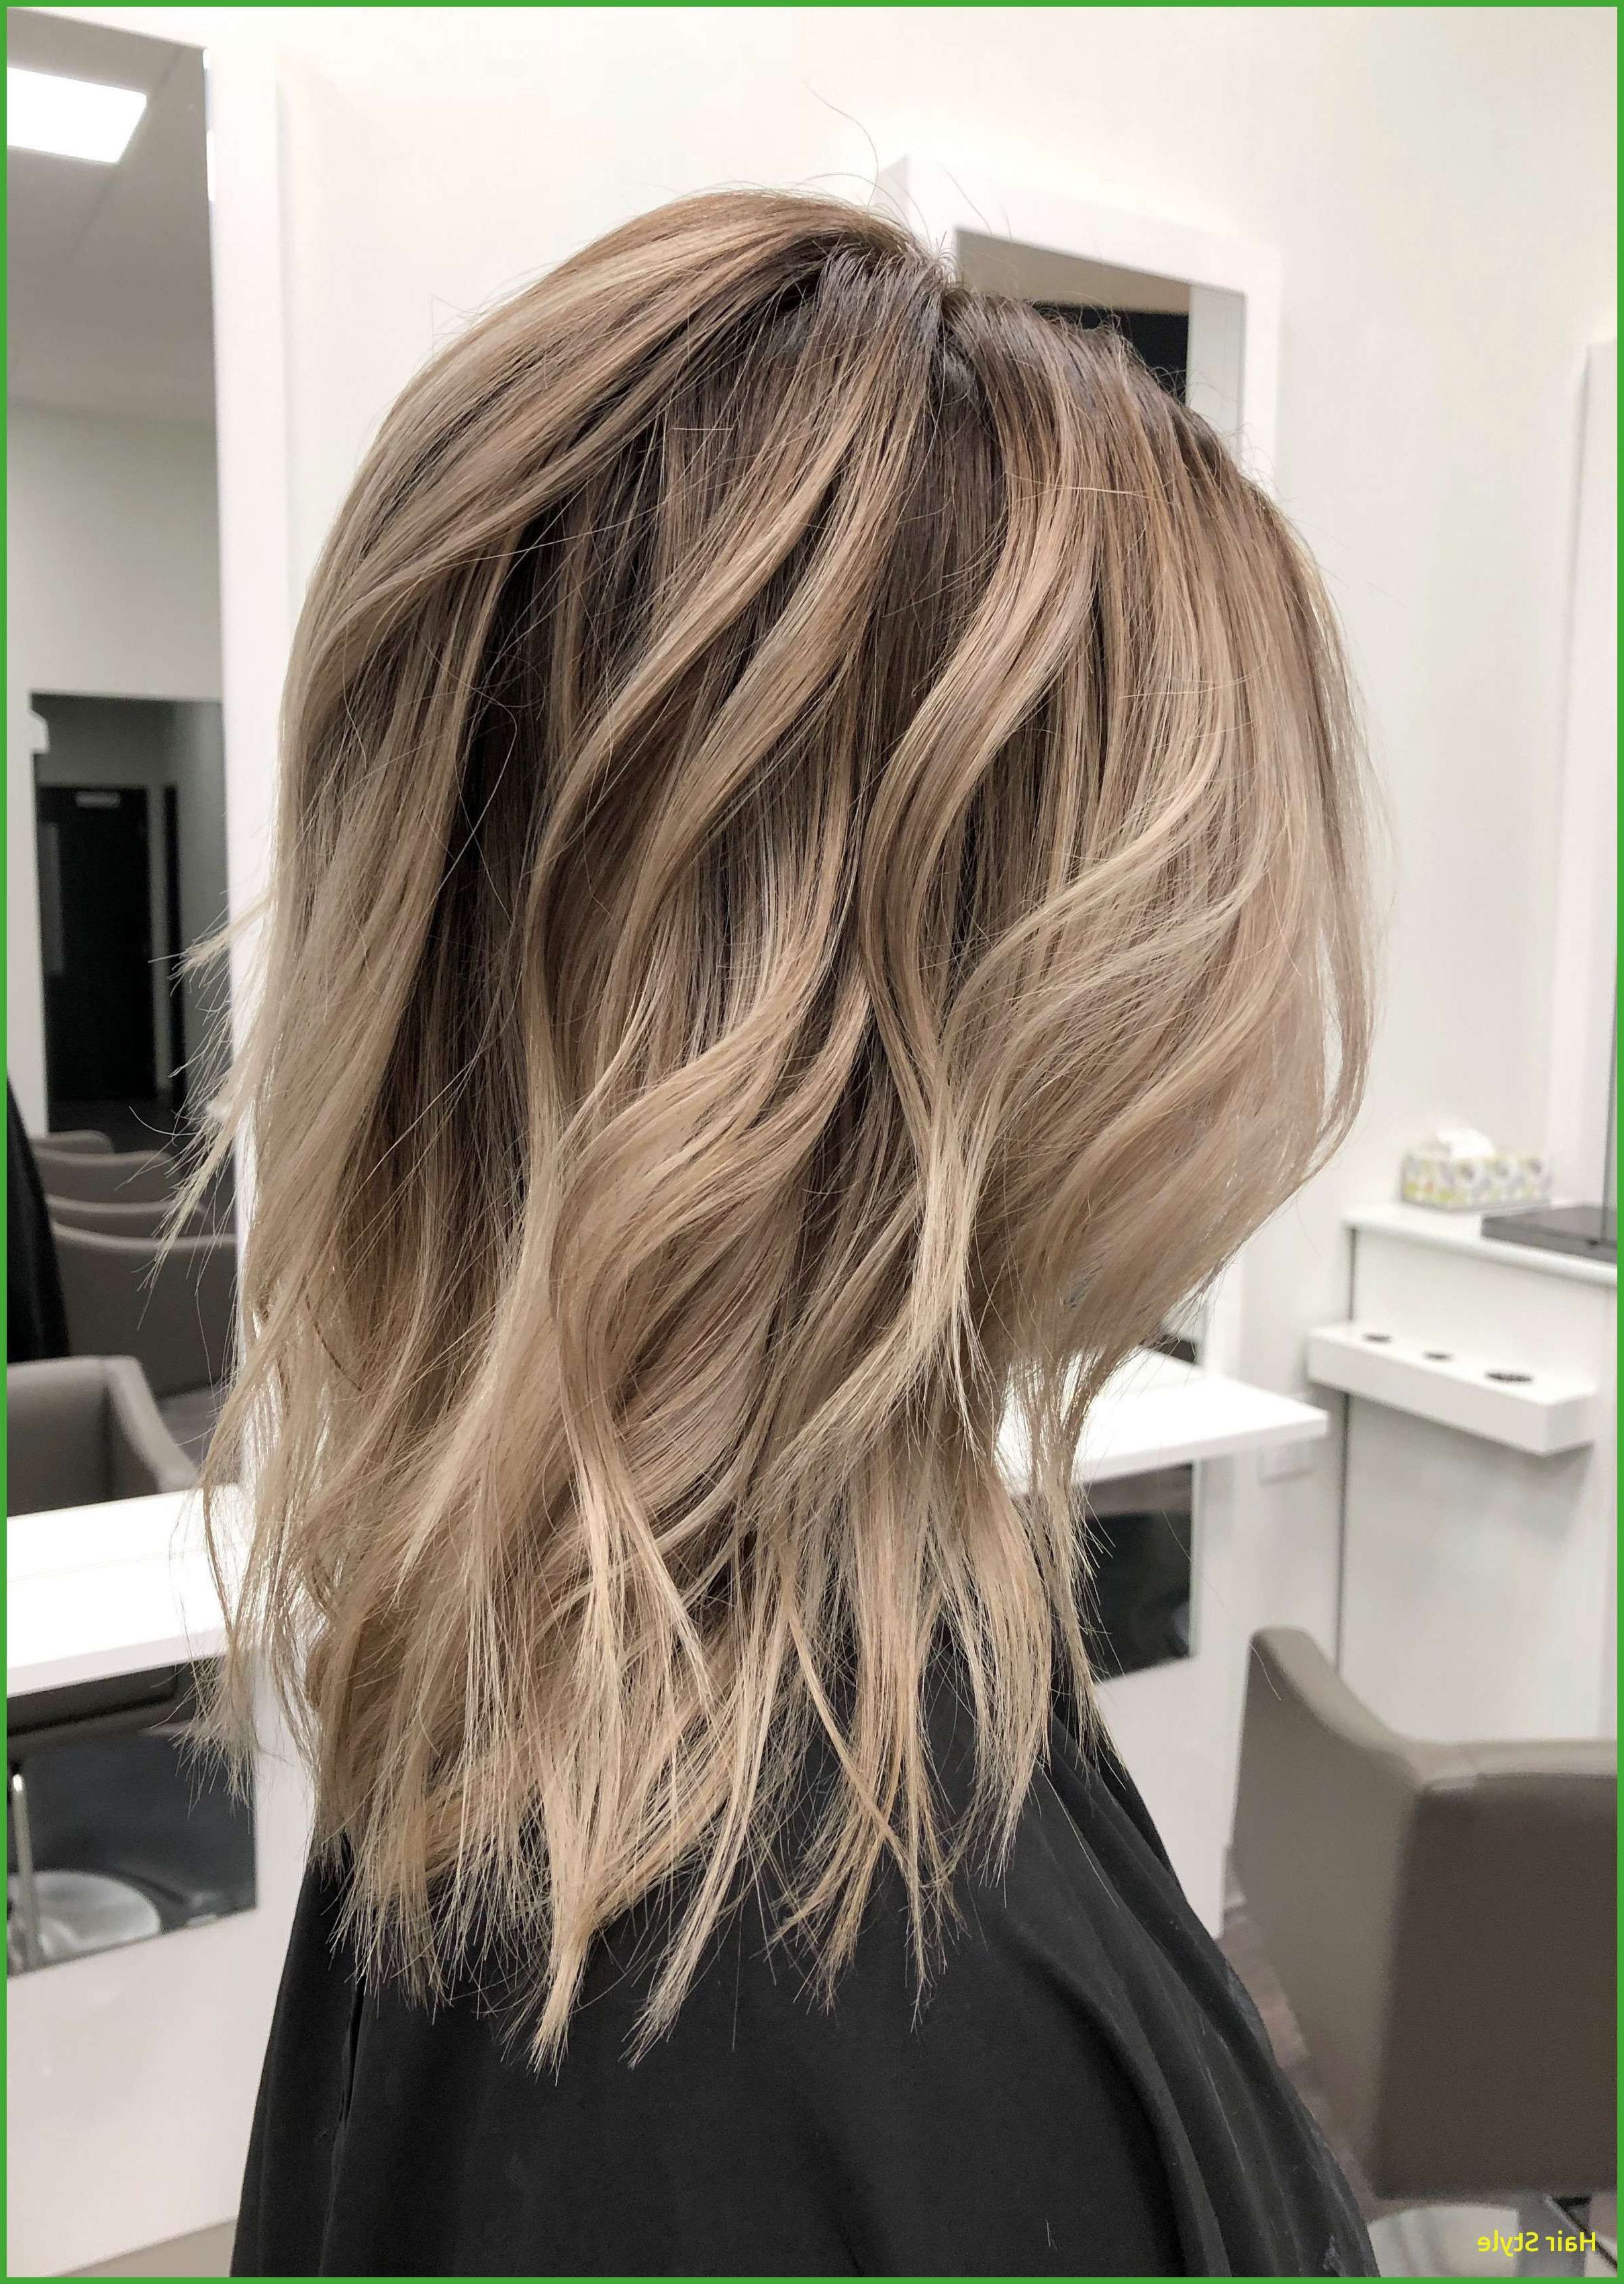 Hairstyles : Choppy Layered Long Haircuts Magnificent Hairstyles Intended For Most Popular Choppy Layers For Straight Long Hairstyles (View 16 of 20)